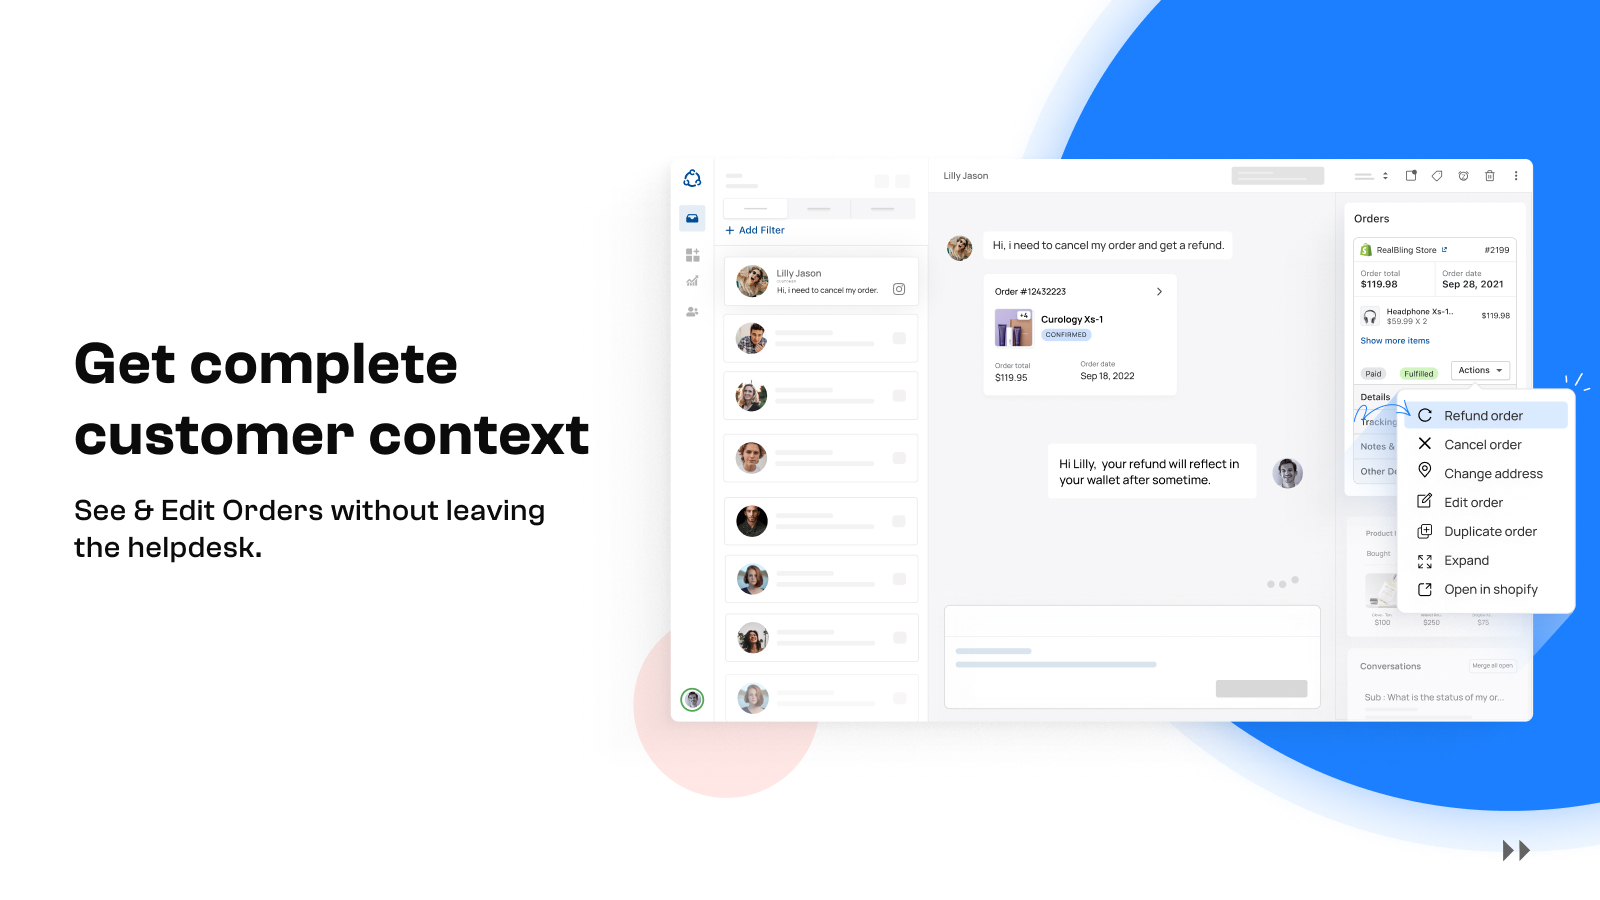 Get Complete customer context in a Single Screen.